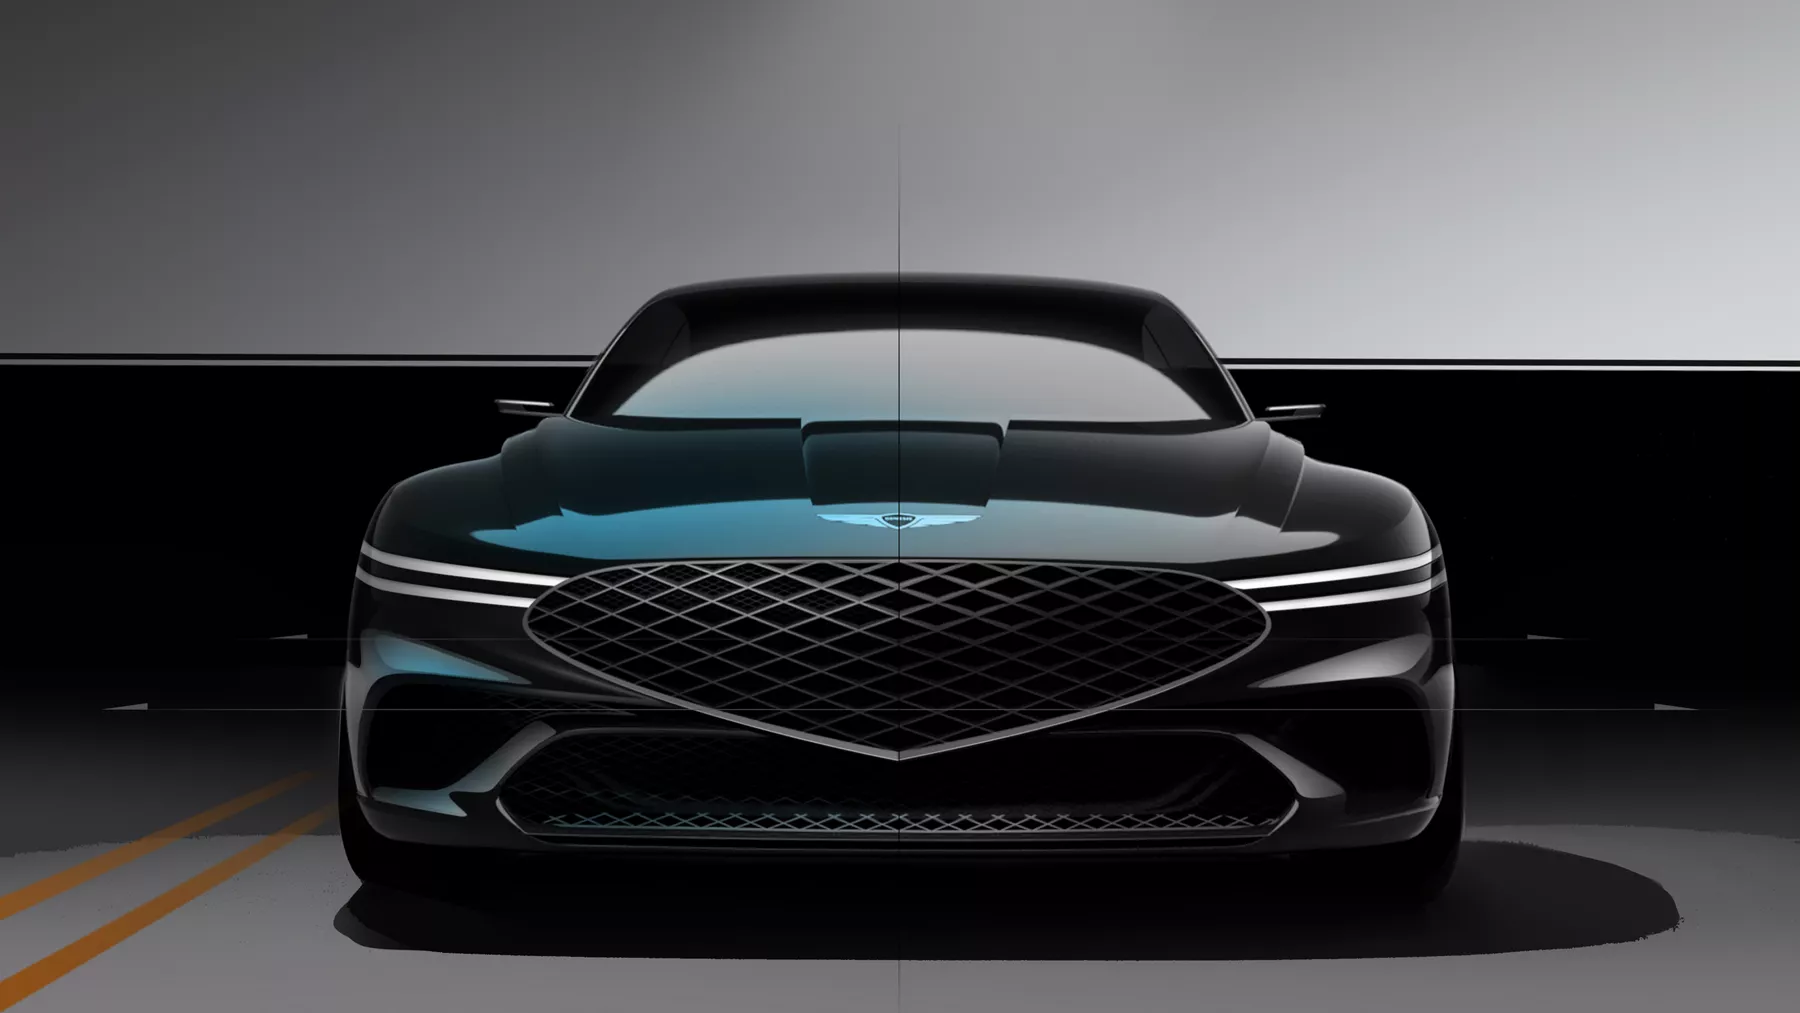 X Concept front grille and front headlights.